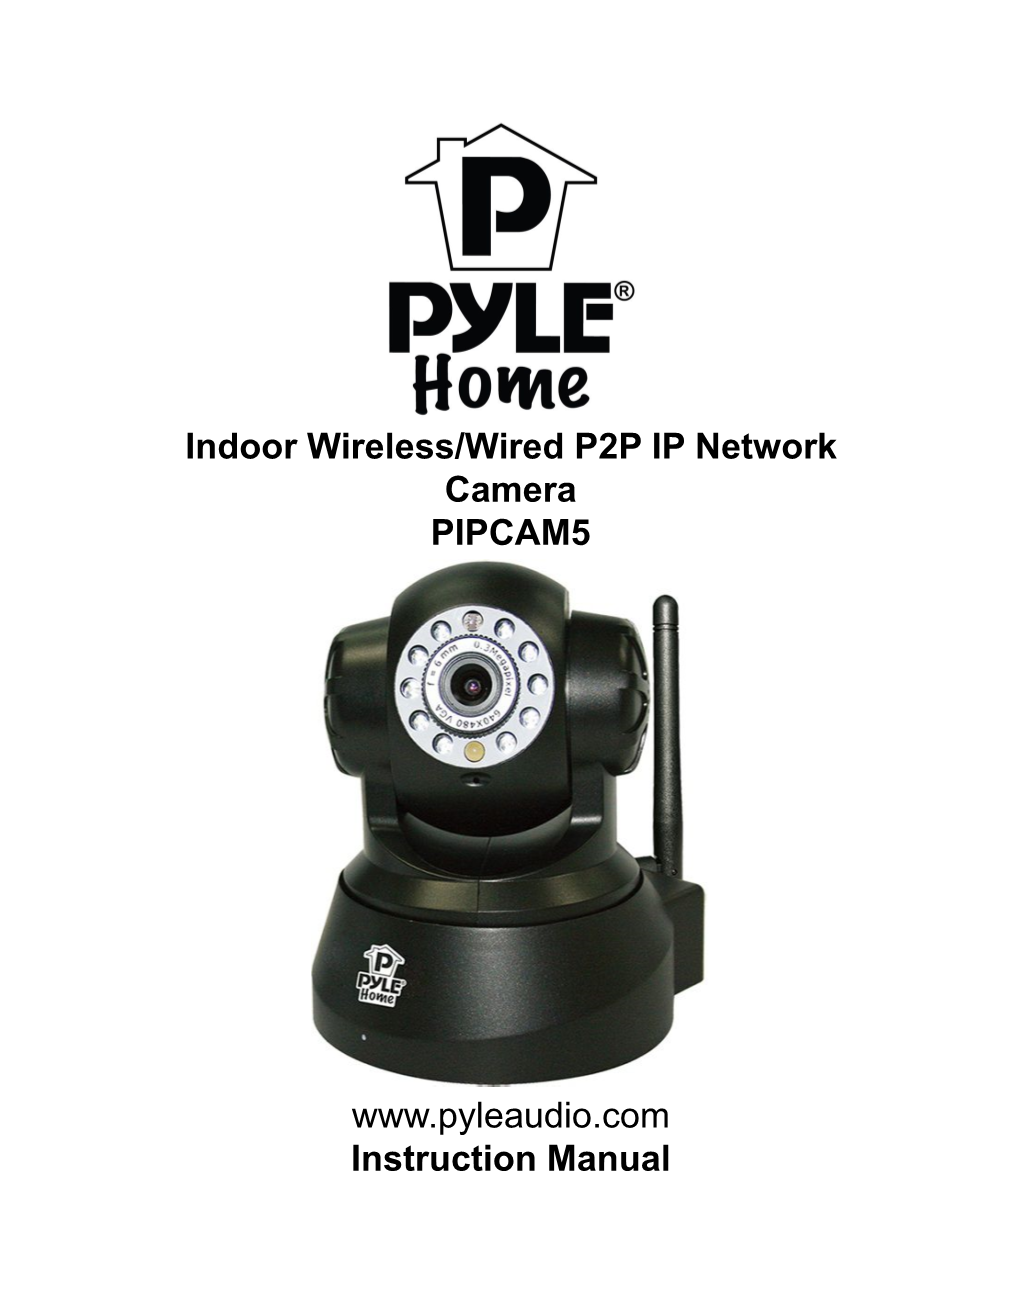 Indoor Wireless/Wired P2P IP Network Camera PIPCAM5